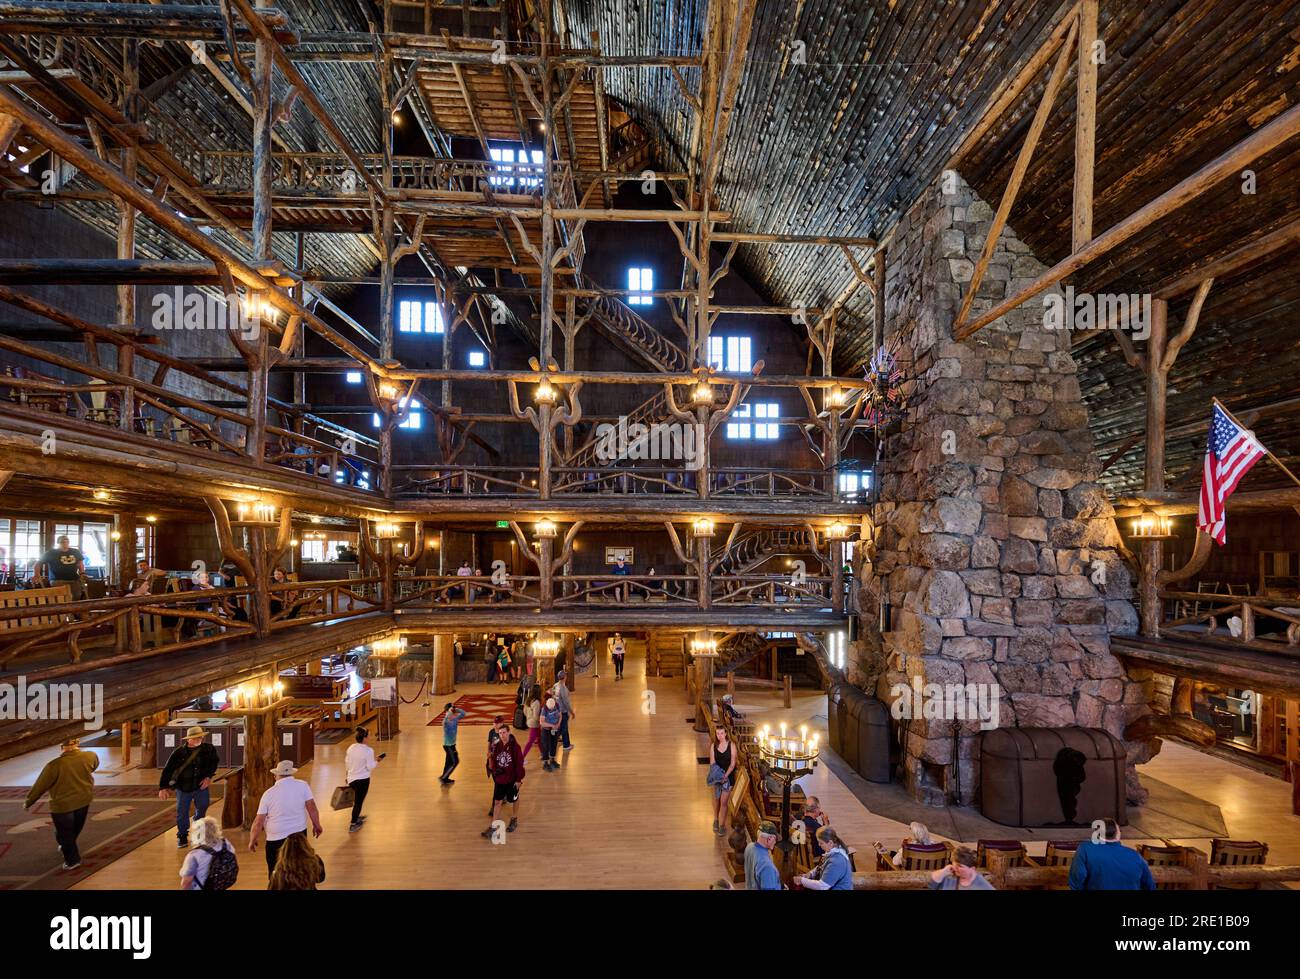 https://c8.alamy.com/comp/2RE1B09/interior-shot-of-wooden-architecture-of-old-faithful-inn-yellowstone-national-park-wyoming-united-states-of-america-2RE1B09.jpg